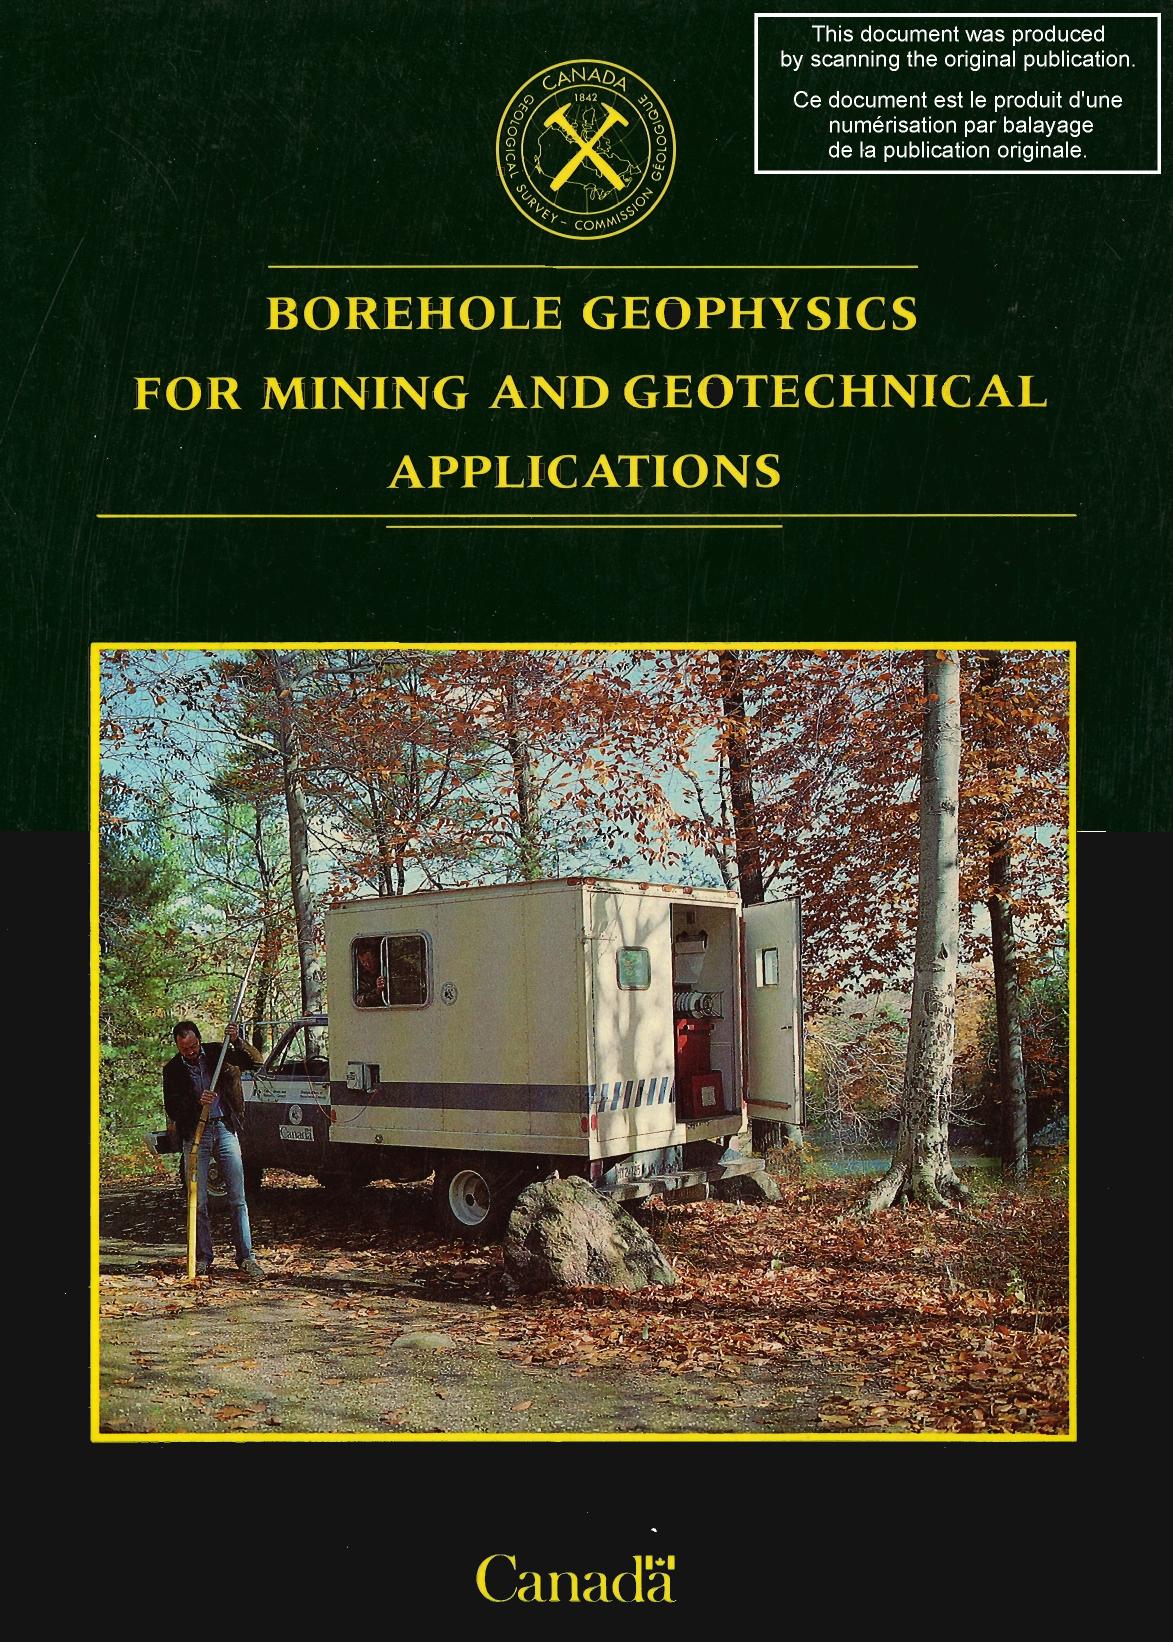 BOREHOLE GEOPHYSICS FOR MINING AND GEOTECHNICAL APPLICATIONS